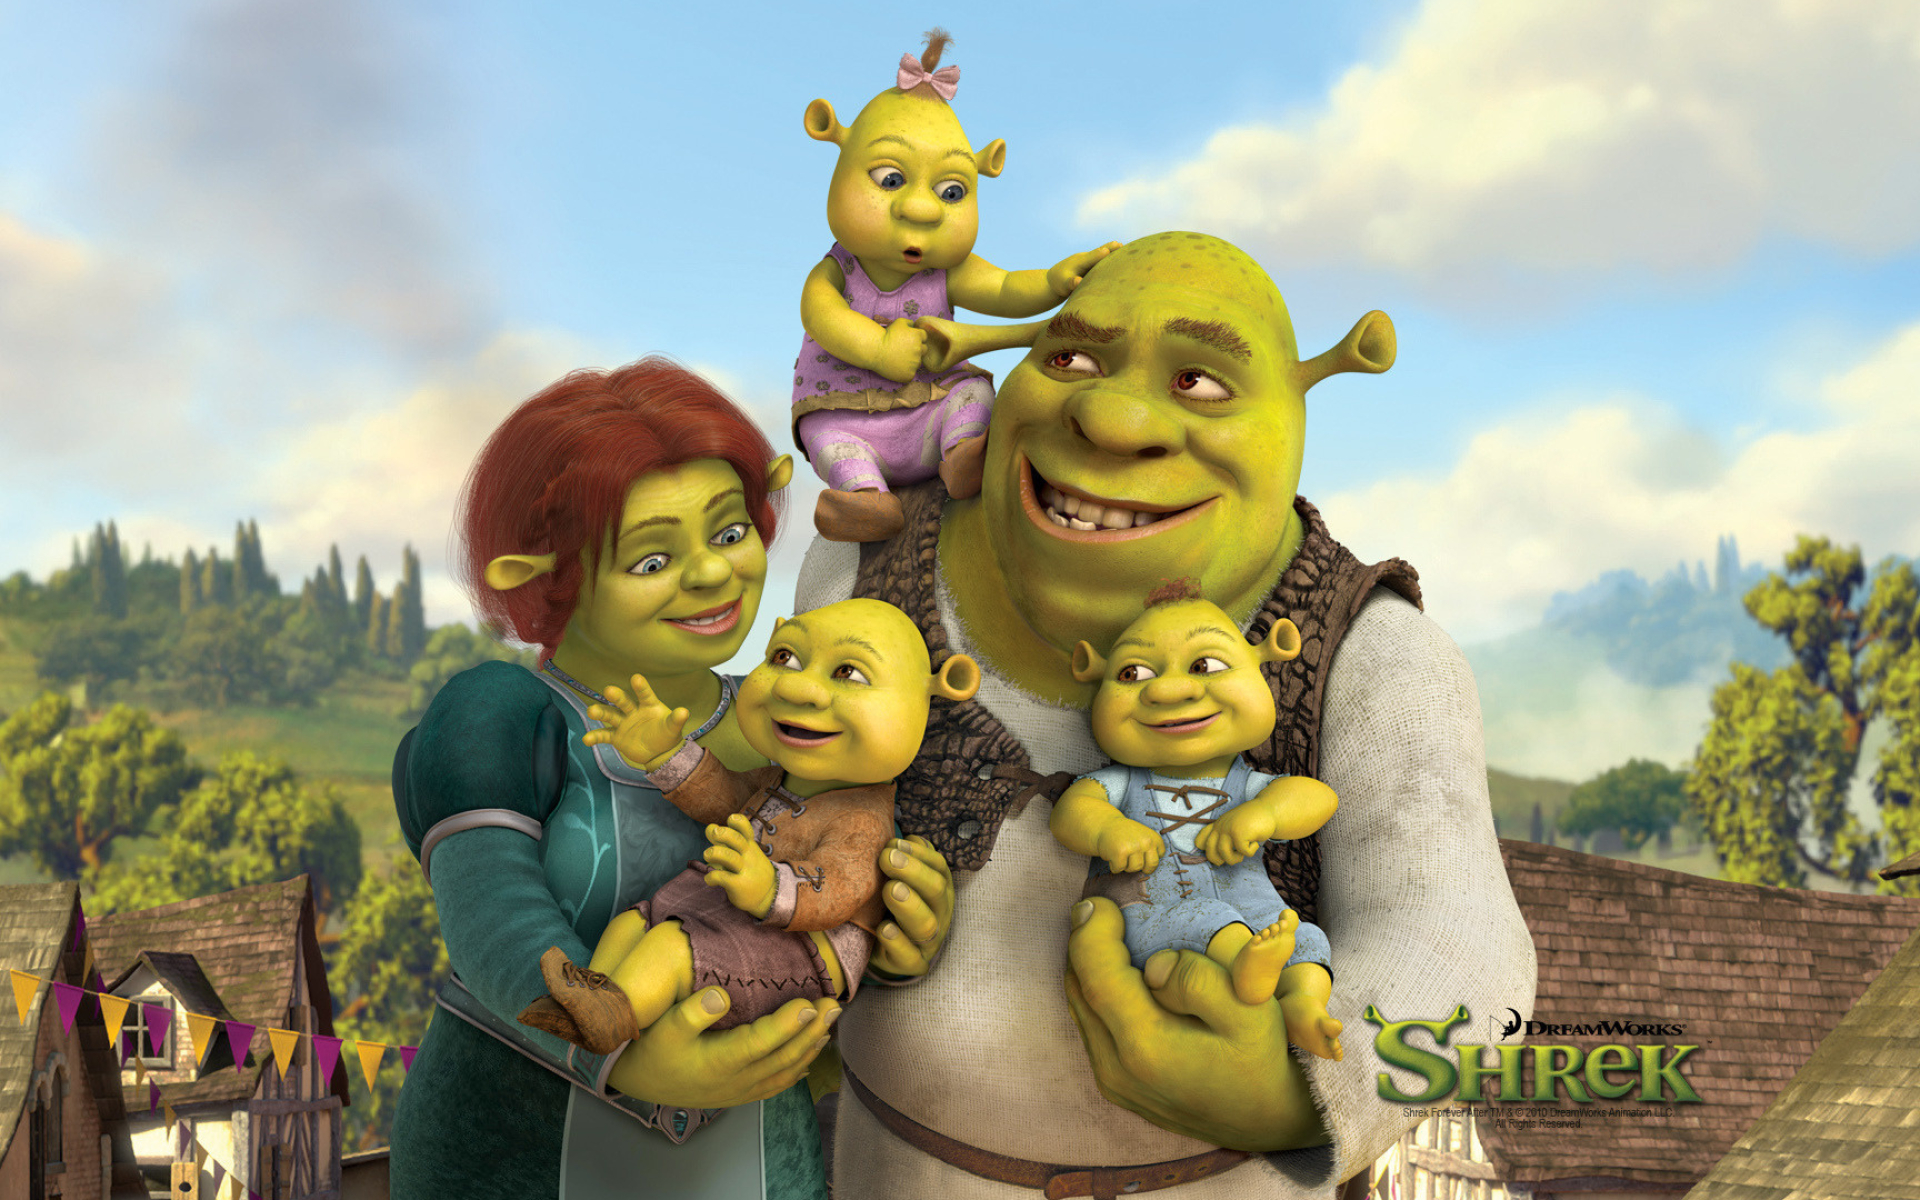 DreamWorks: Shrek, 2010 American computer-animated comedy film based on the 1990 children's picture book. 1920x1200 HD Wallpaper.